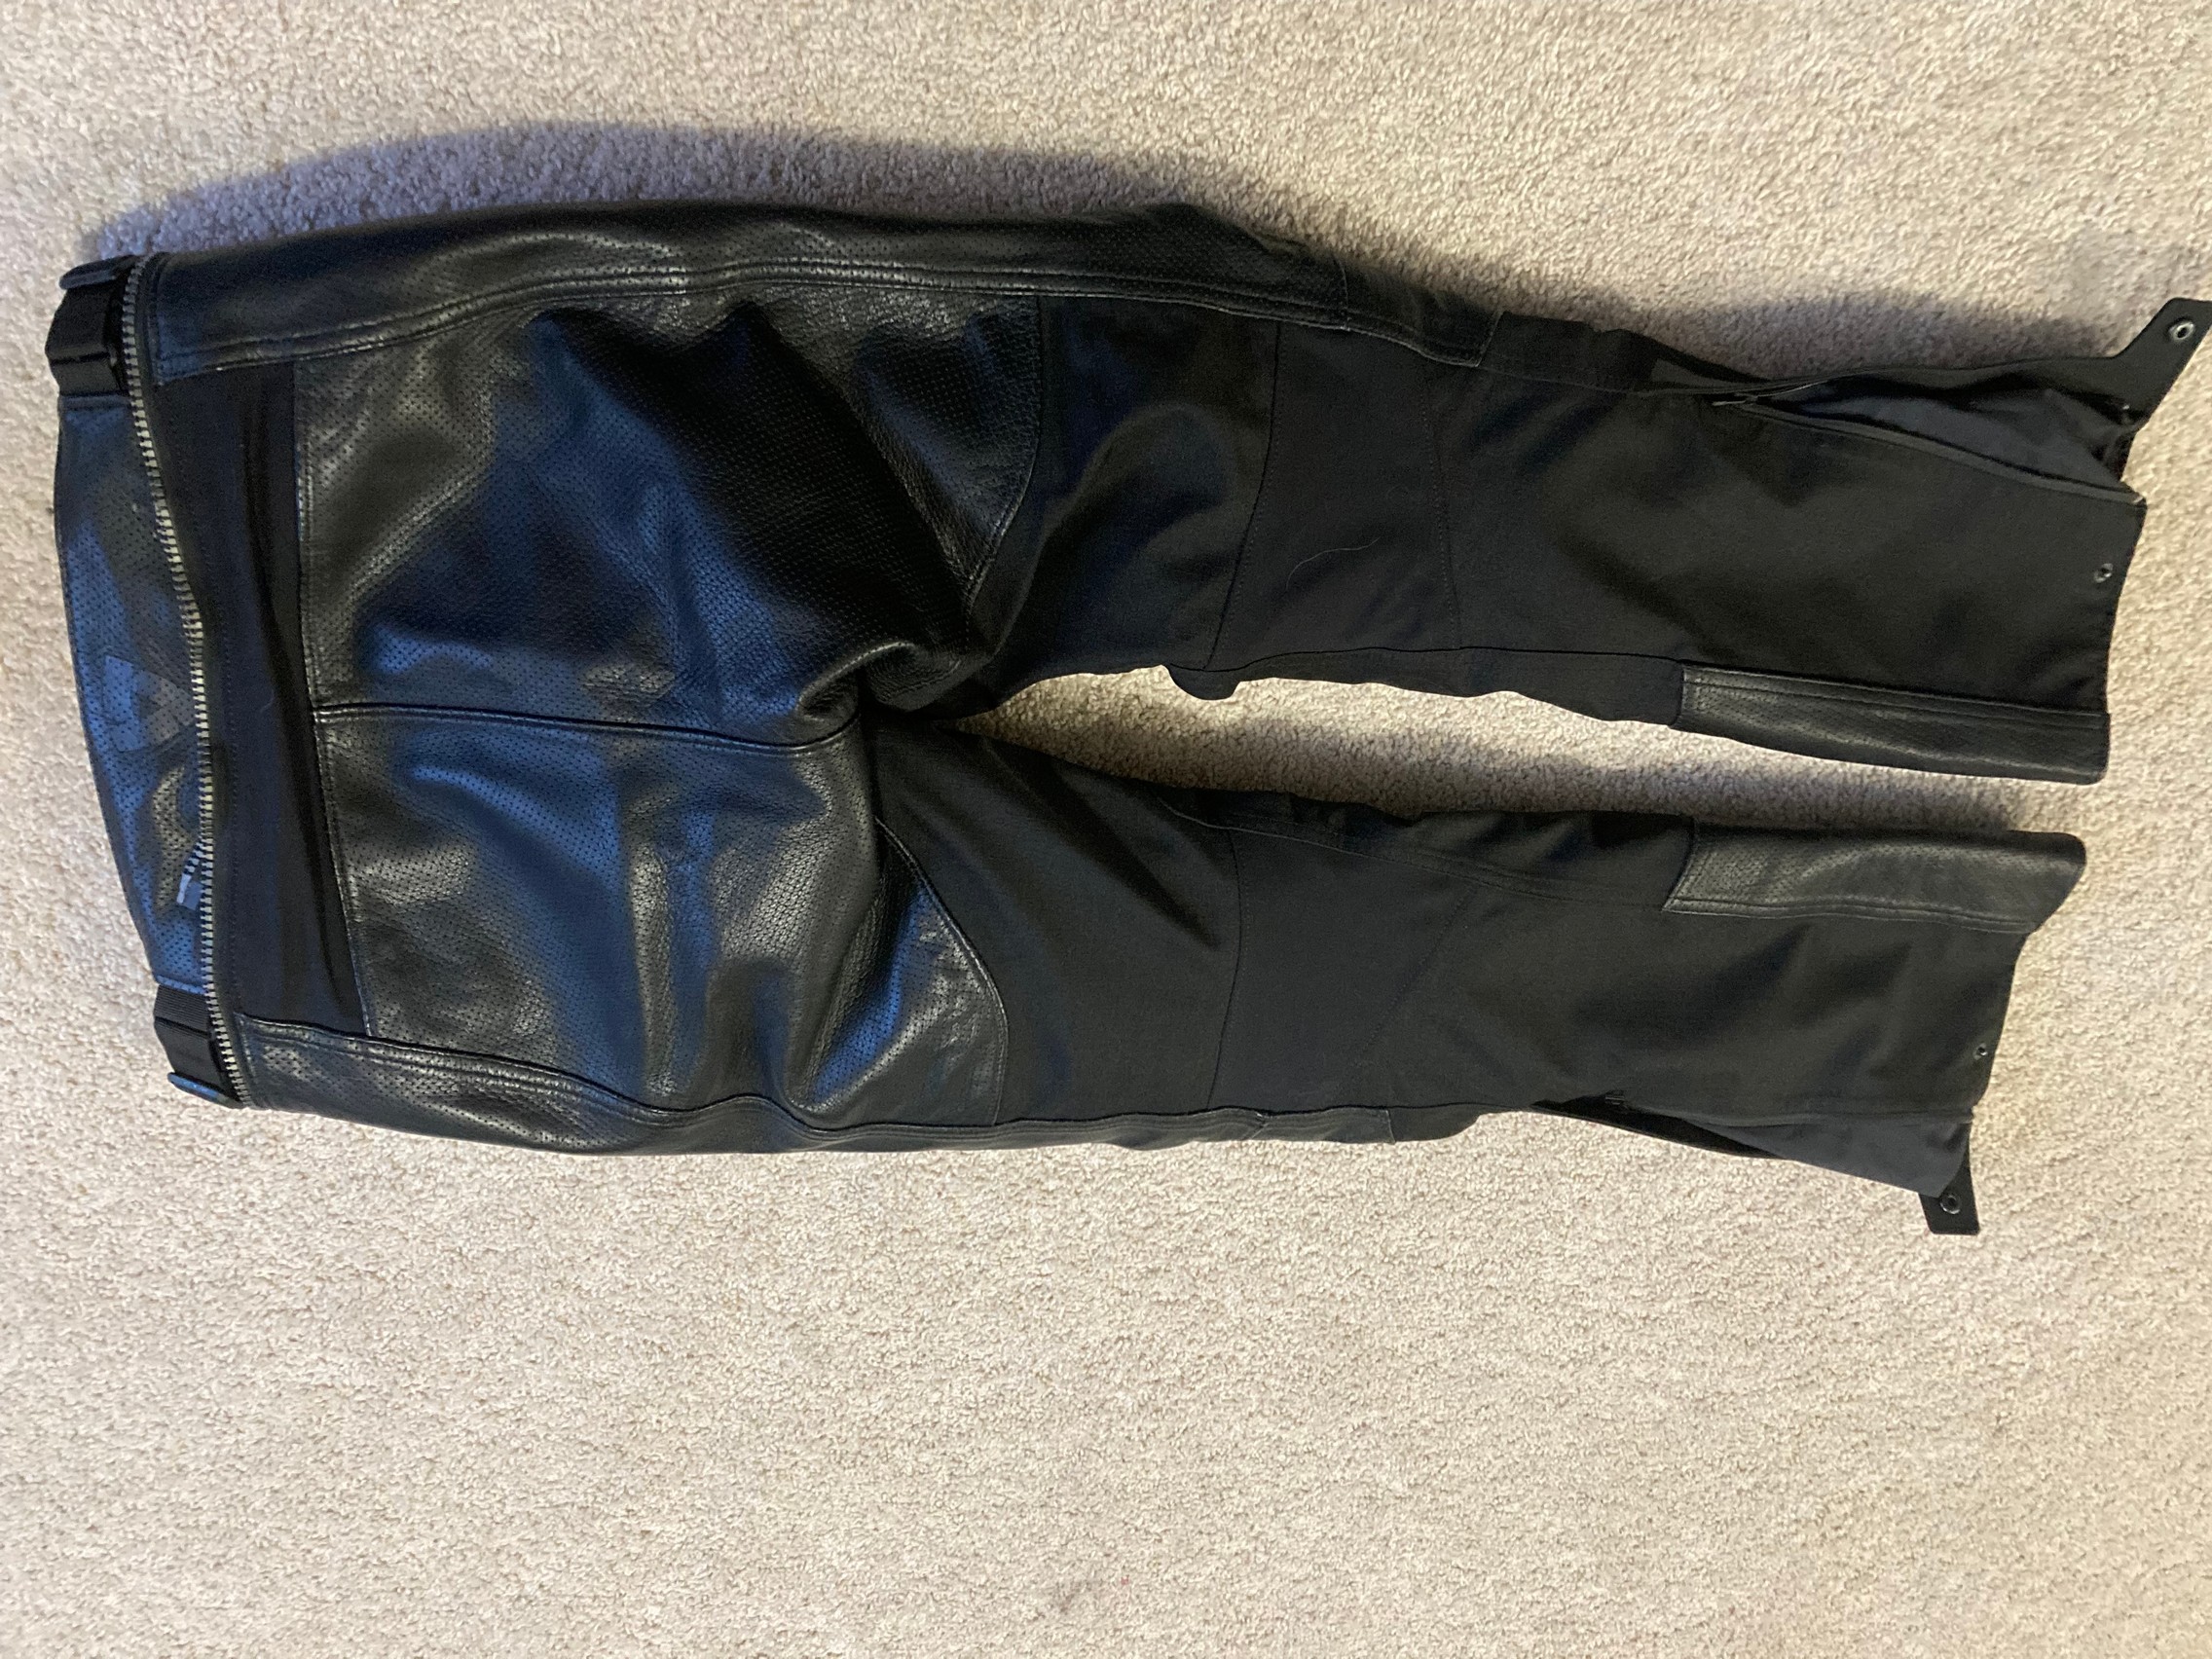 REV’IT! Valve H2O Pants Hands-On Review